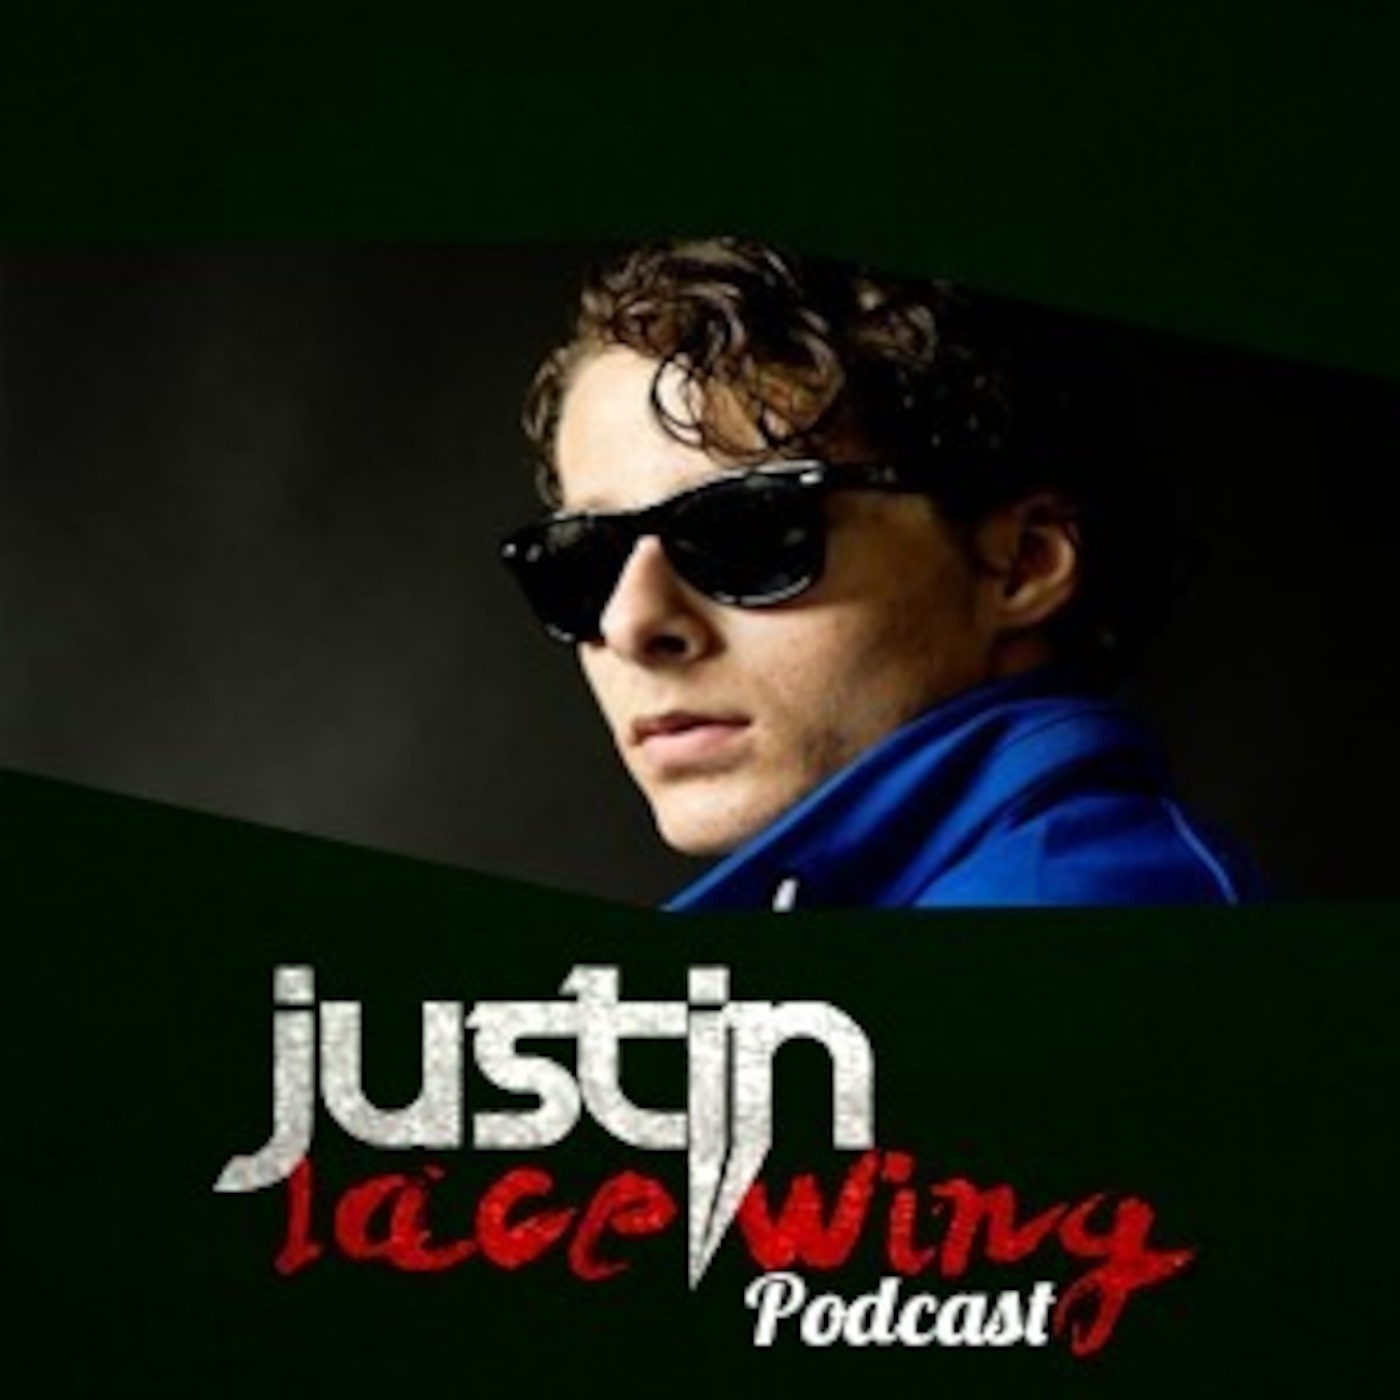 Justin Lacewing's Podcast